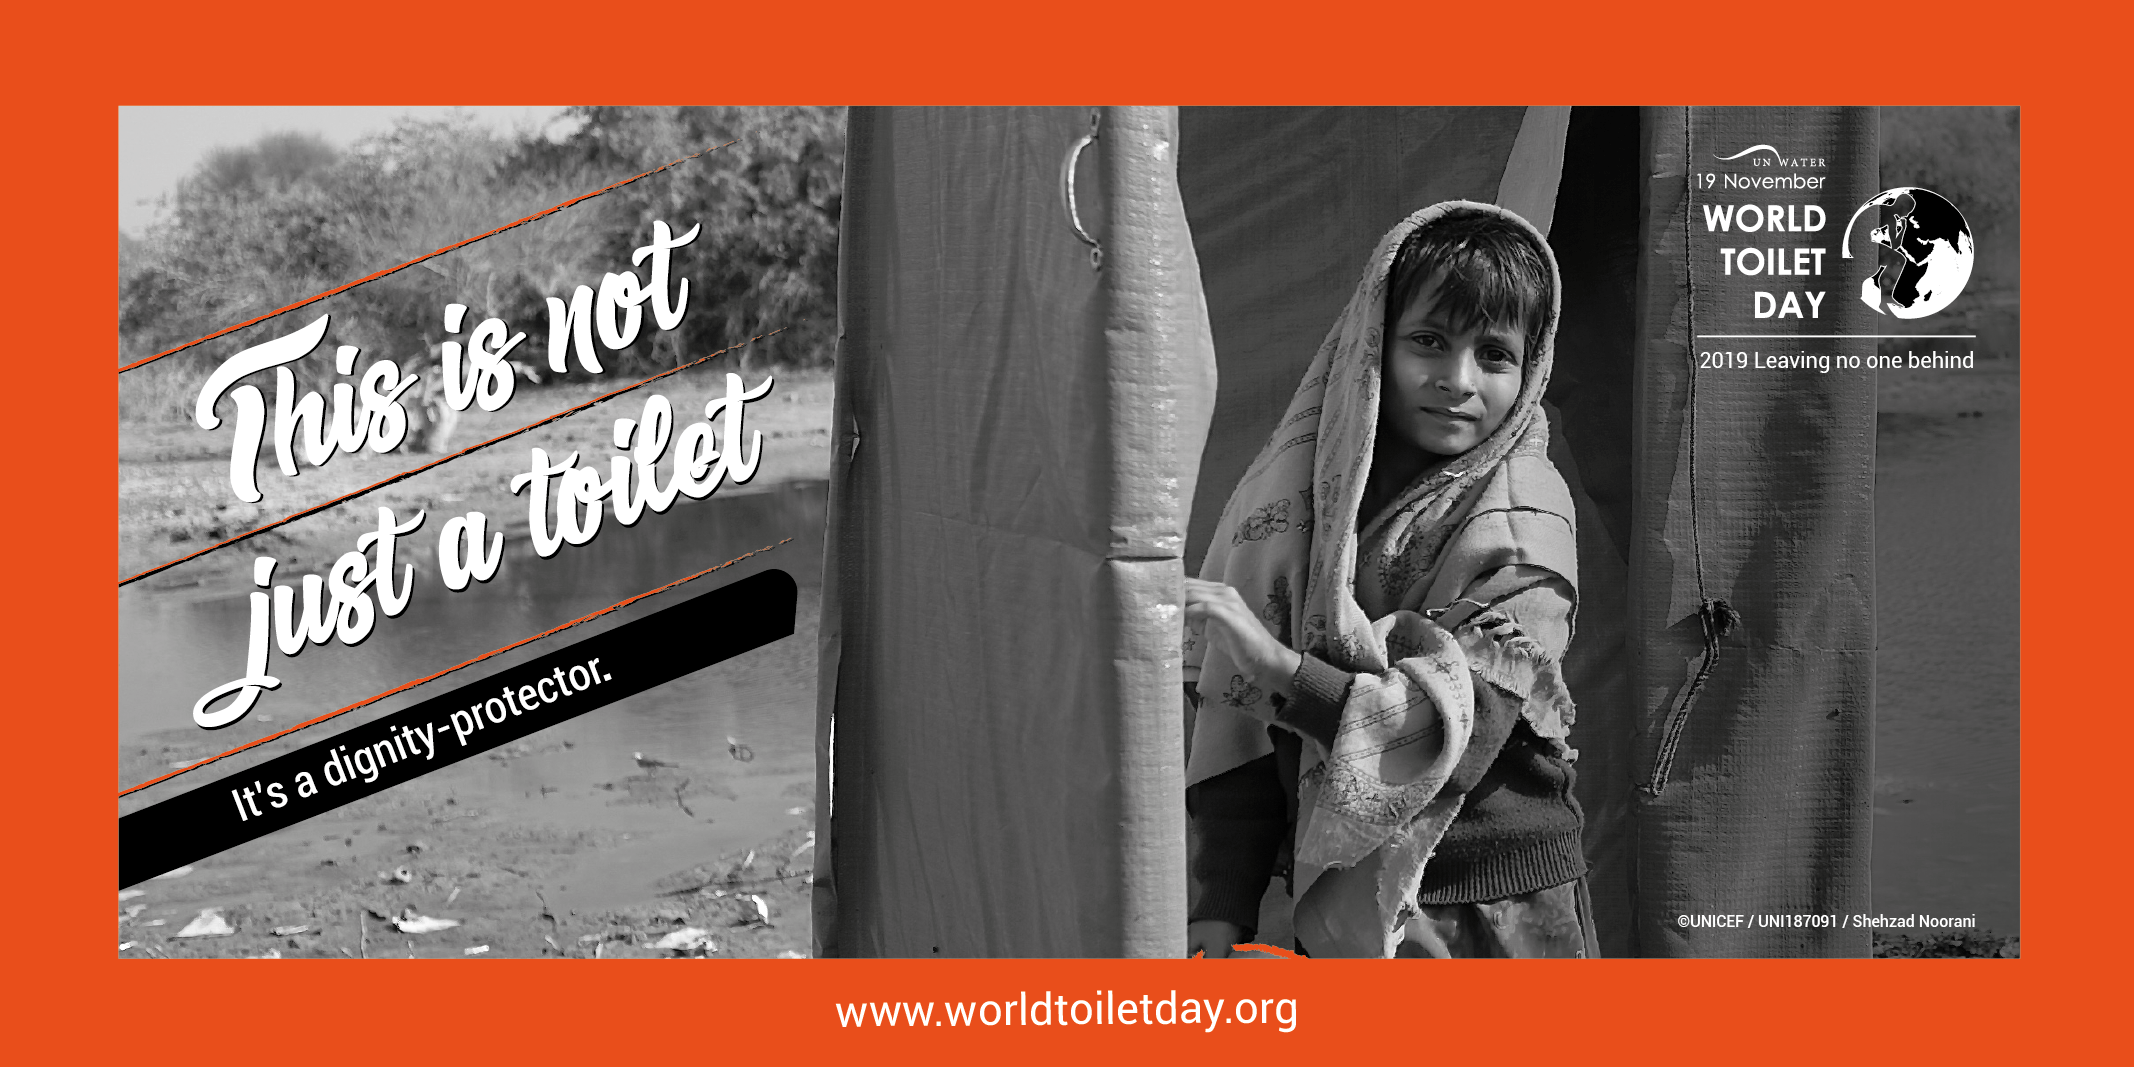 Small child with text for World Toilet Day 2019: "This is not just a toilet. It's a dignity protector." Credit: www.worldtoiletday.org